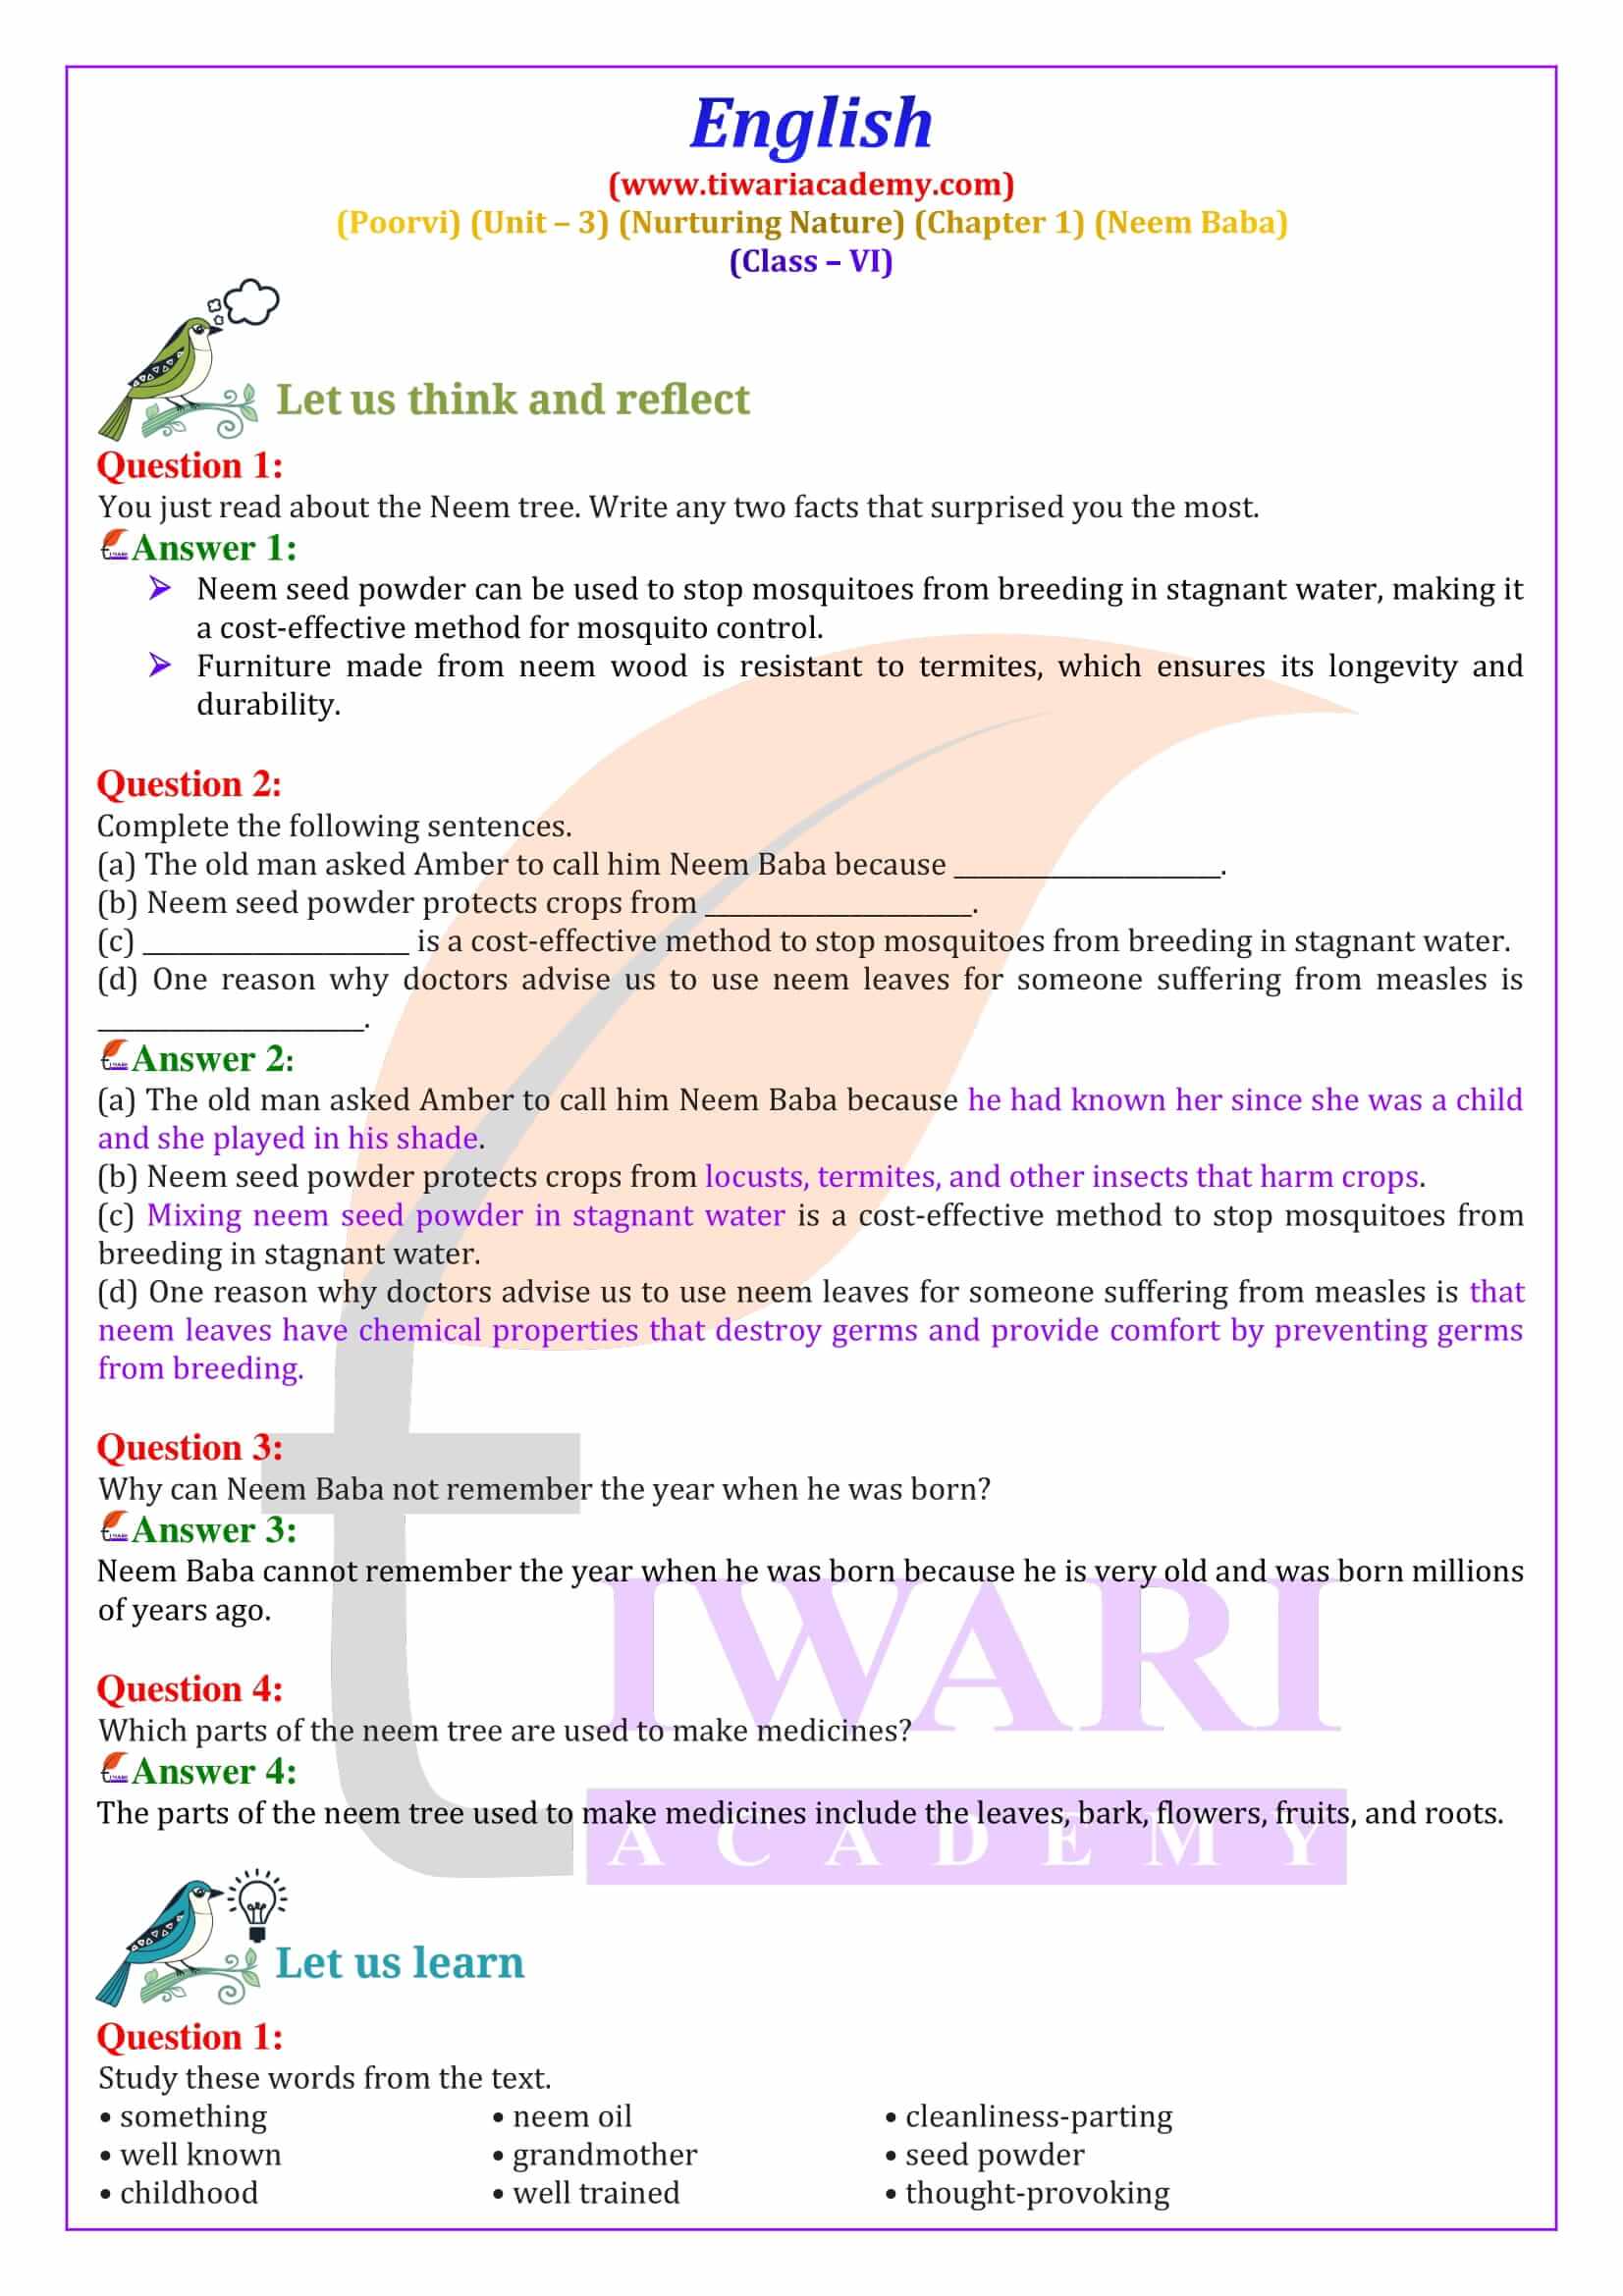 Class 6 English Poorvi Unit 3 Nurturing Nature Chapter 1 Neem Baba Solutions guide